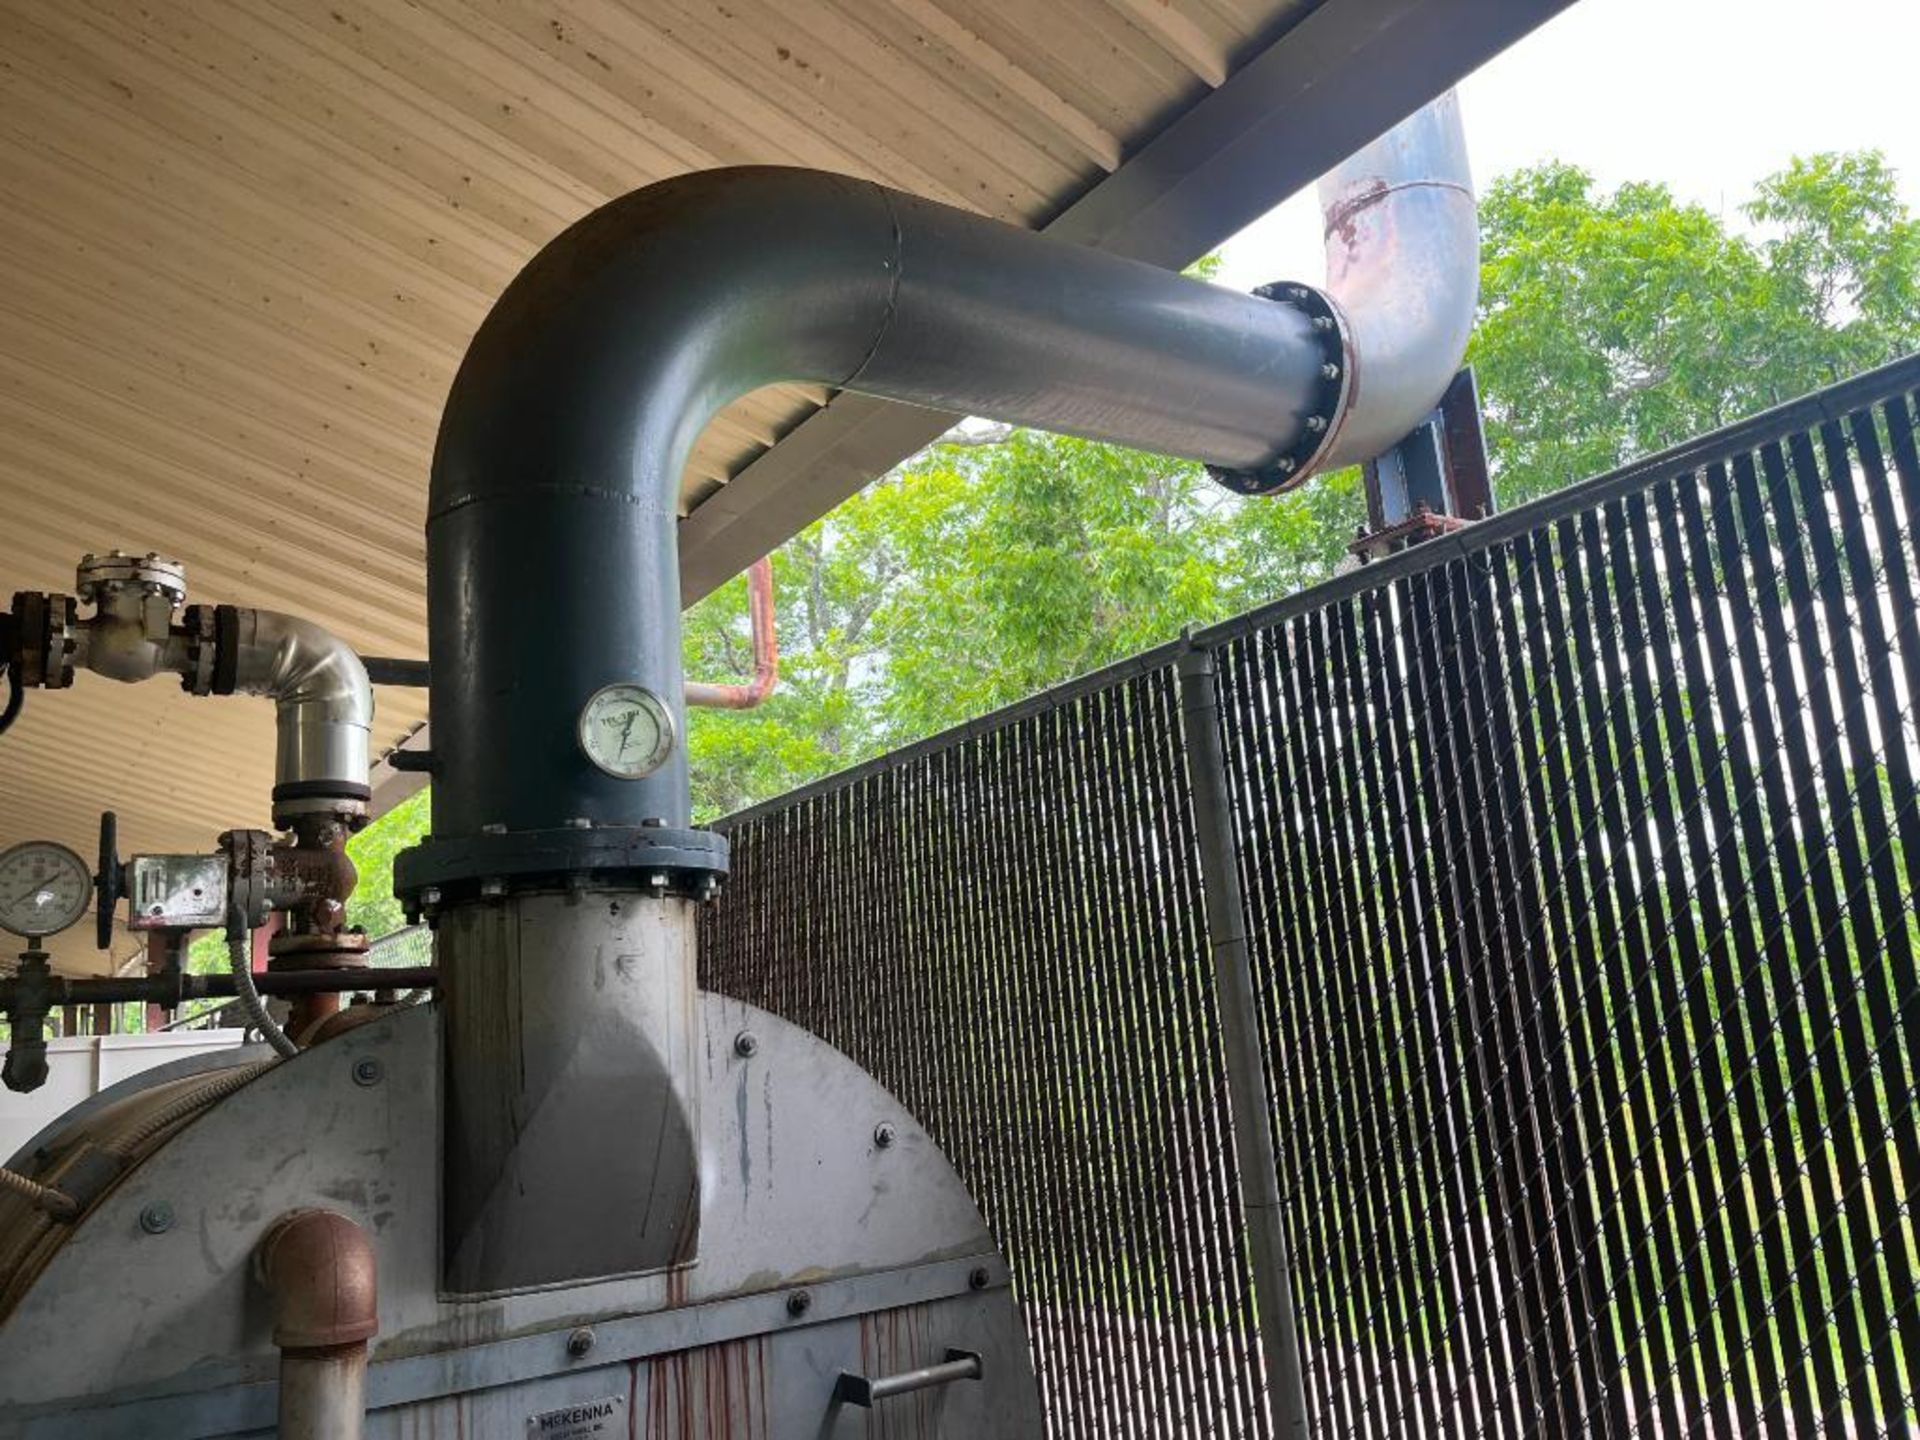 McKenna Boiler Works Natural Gas 2 Pass Fire Tube Steam Boiler, Model MBW-50. 328 Square feet heatin - Image 5 of 26